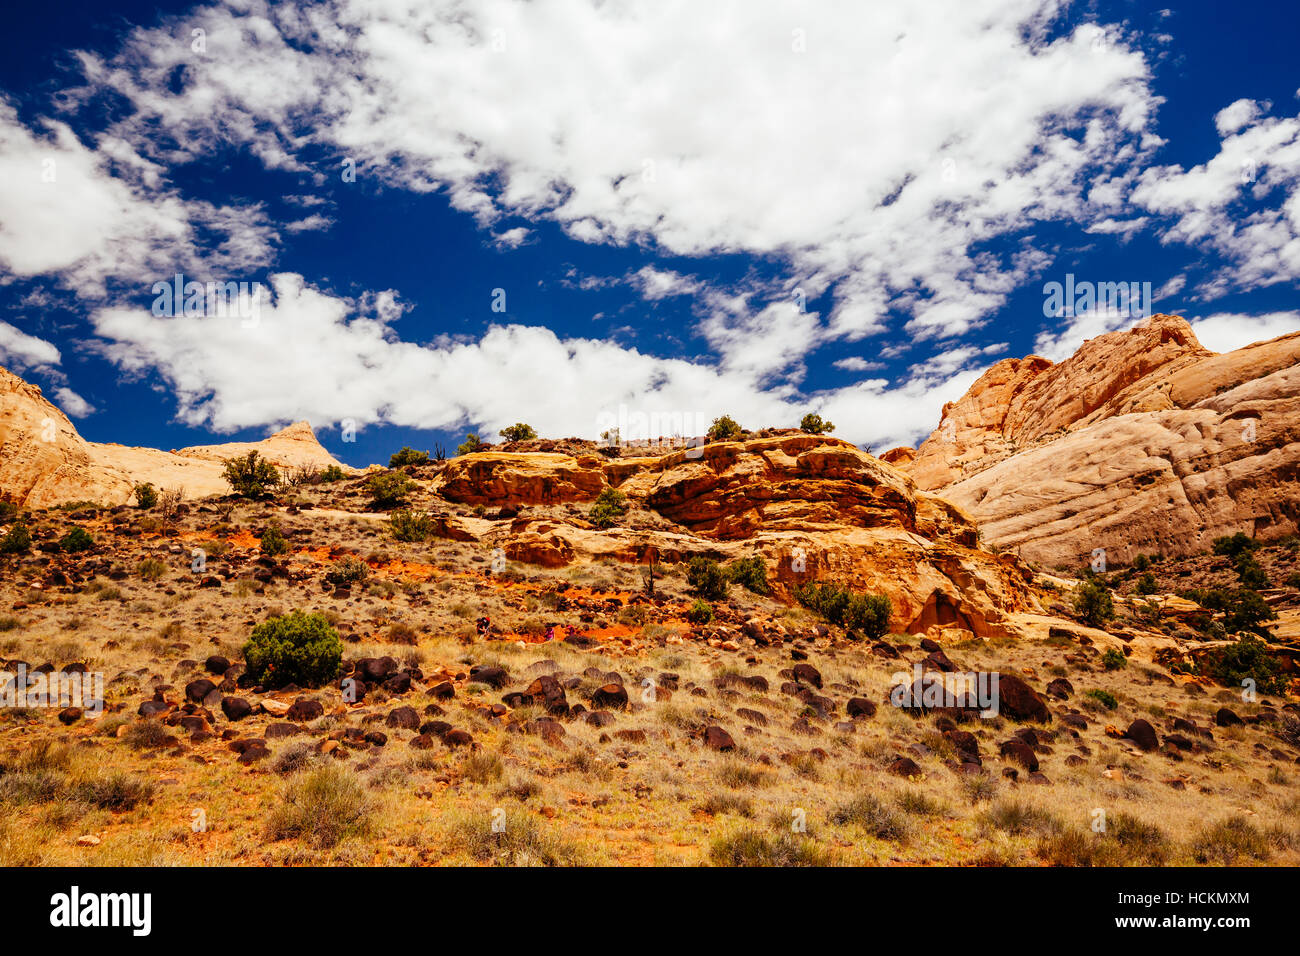 The trail to Hickman Bridge is Capitol Reef National Parks most popular hike and features fantastic views of the Waterpocket Fold and the majestic nat Stock Photo